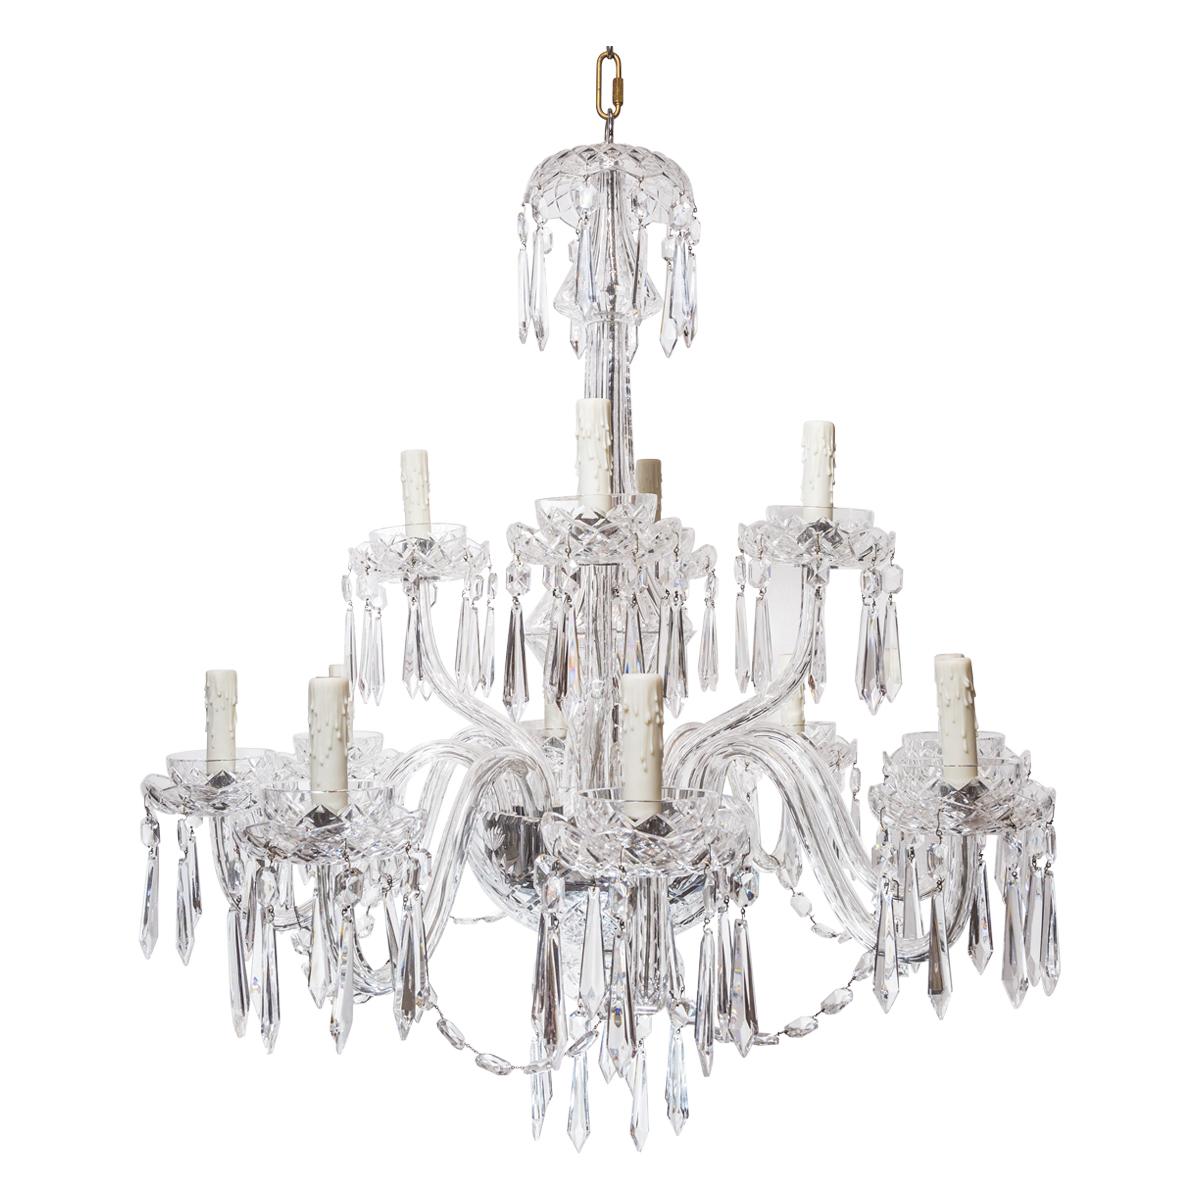 Antique Waterford Crystal Chandelier